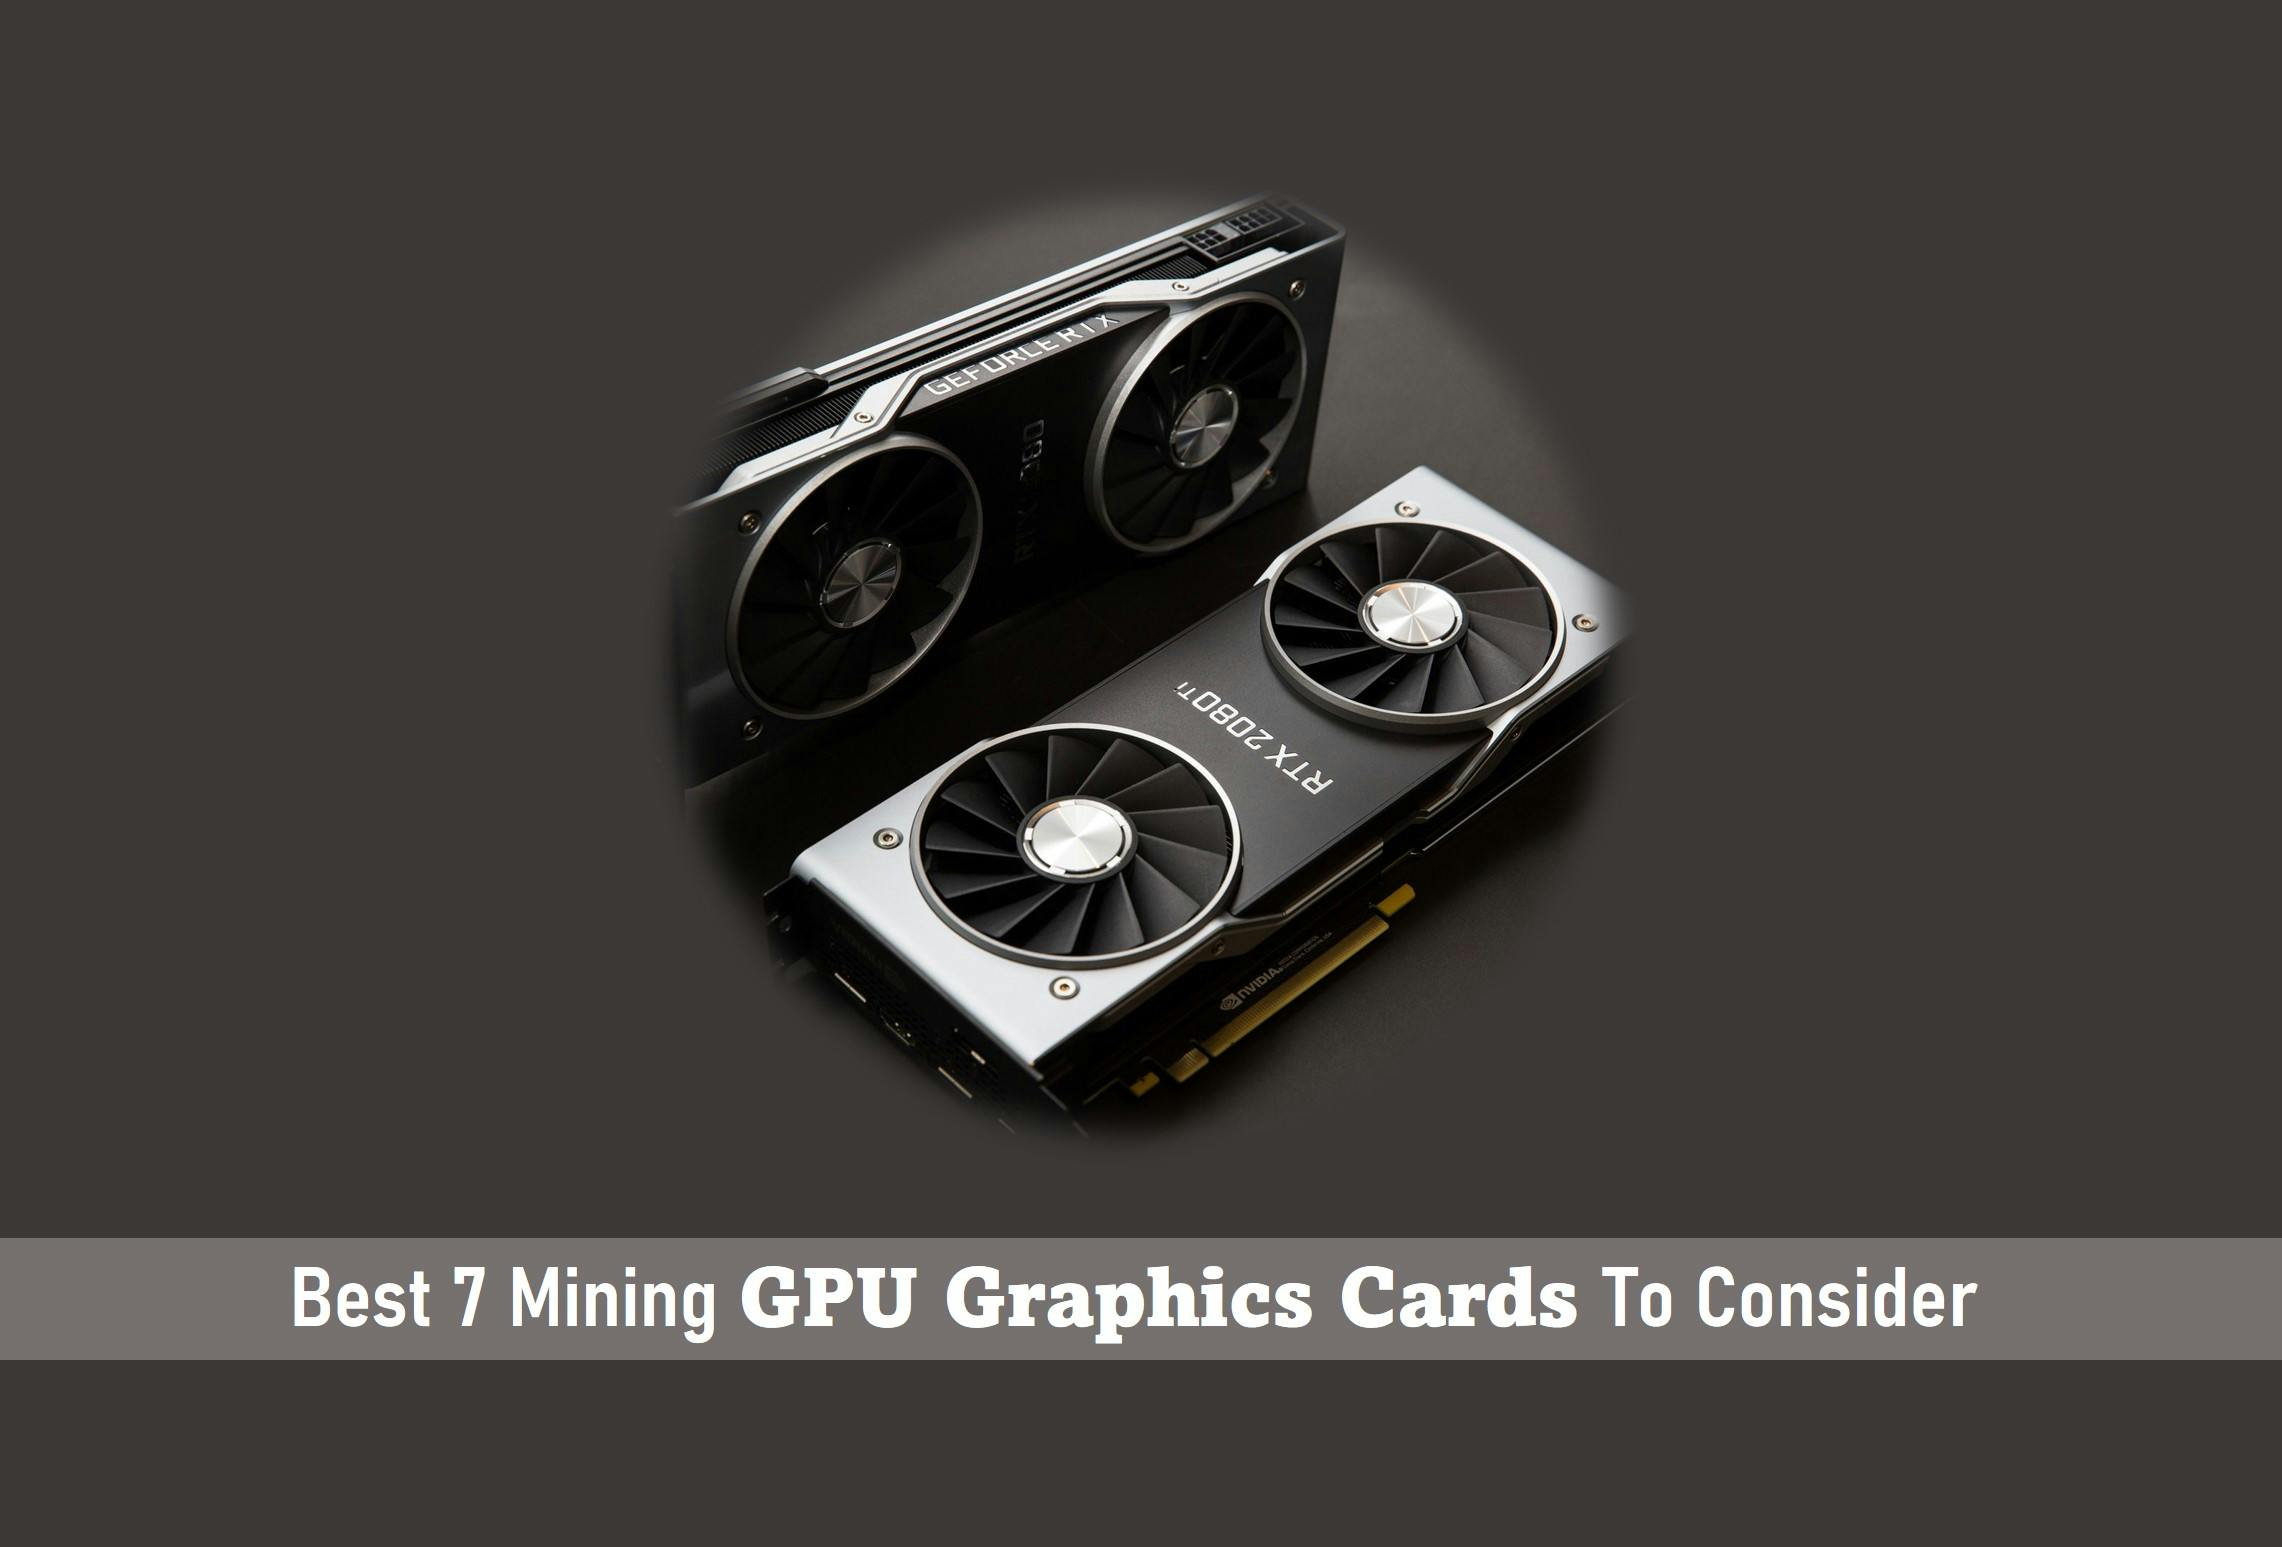 Best 7 Mining GPU Graphics Cards To Consider